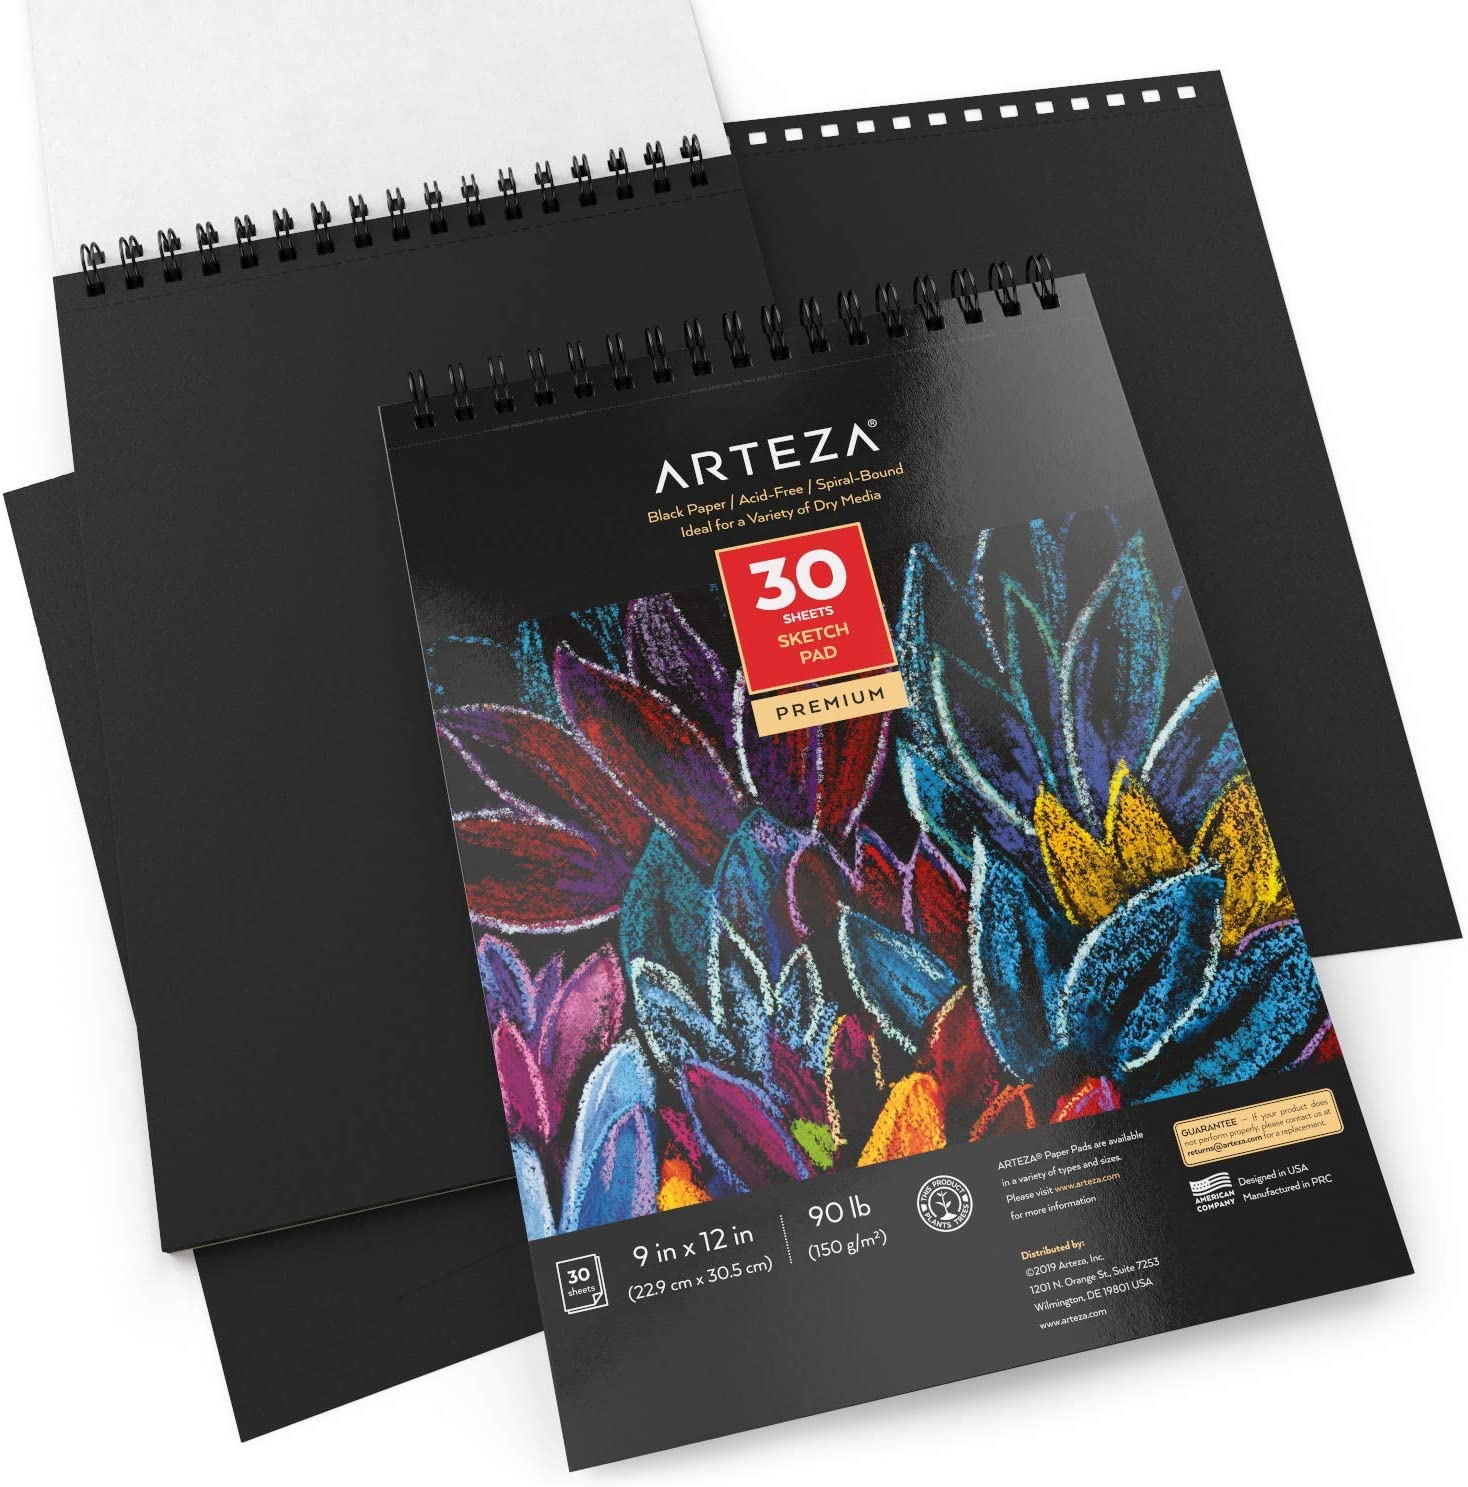 Black Paper Sketchbook 9x12 inches Sketch Pad - 70 Pages